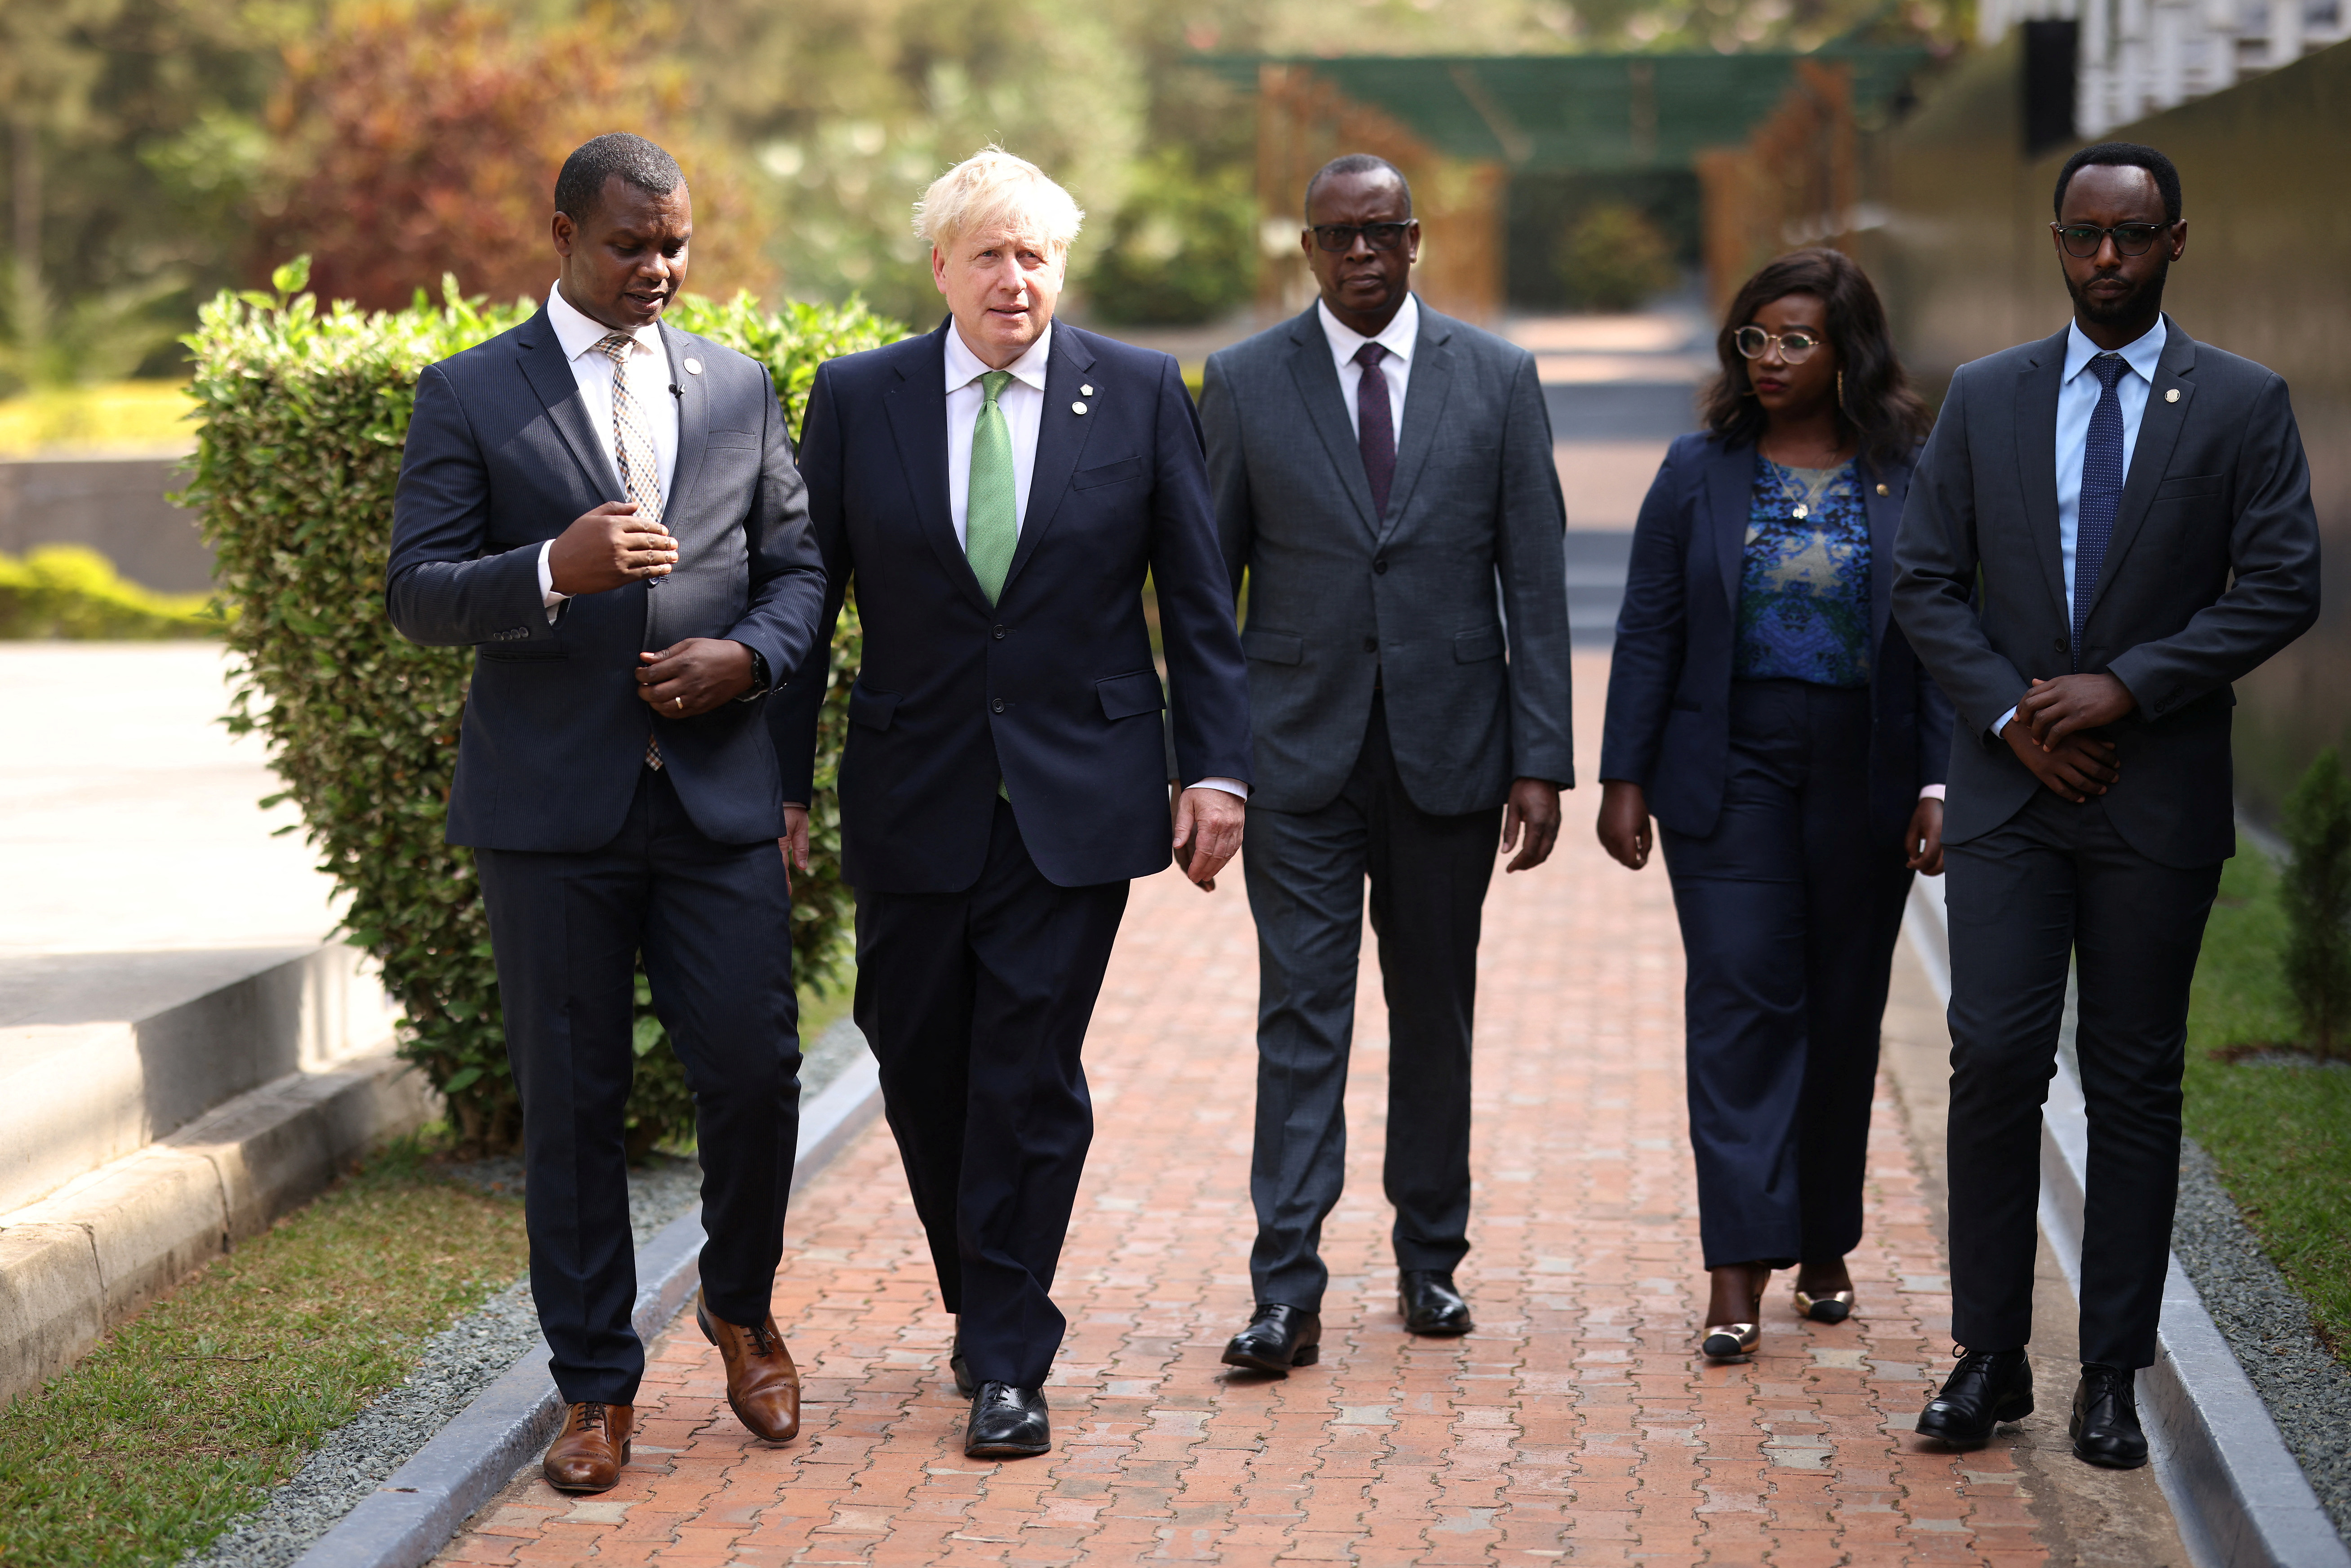 Britain's PM Attends Day Four Of The 2022 Commonwealth Heads of Government Meeting